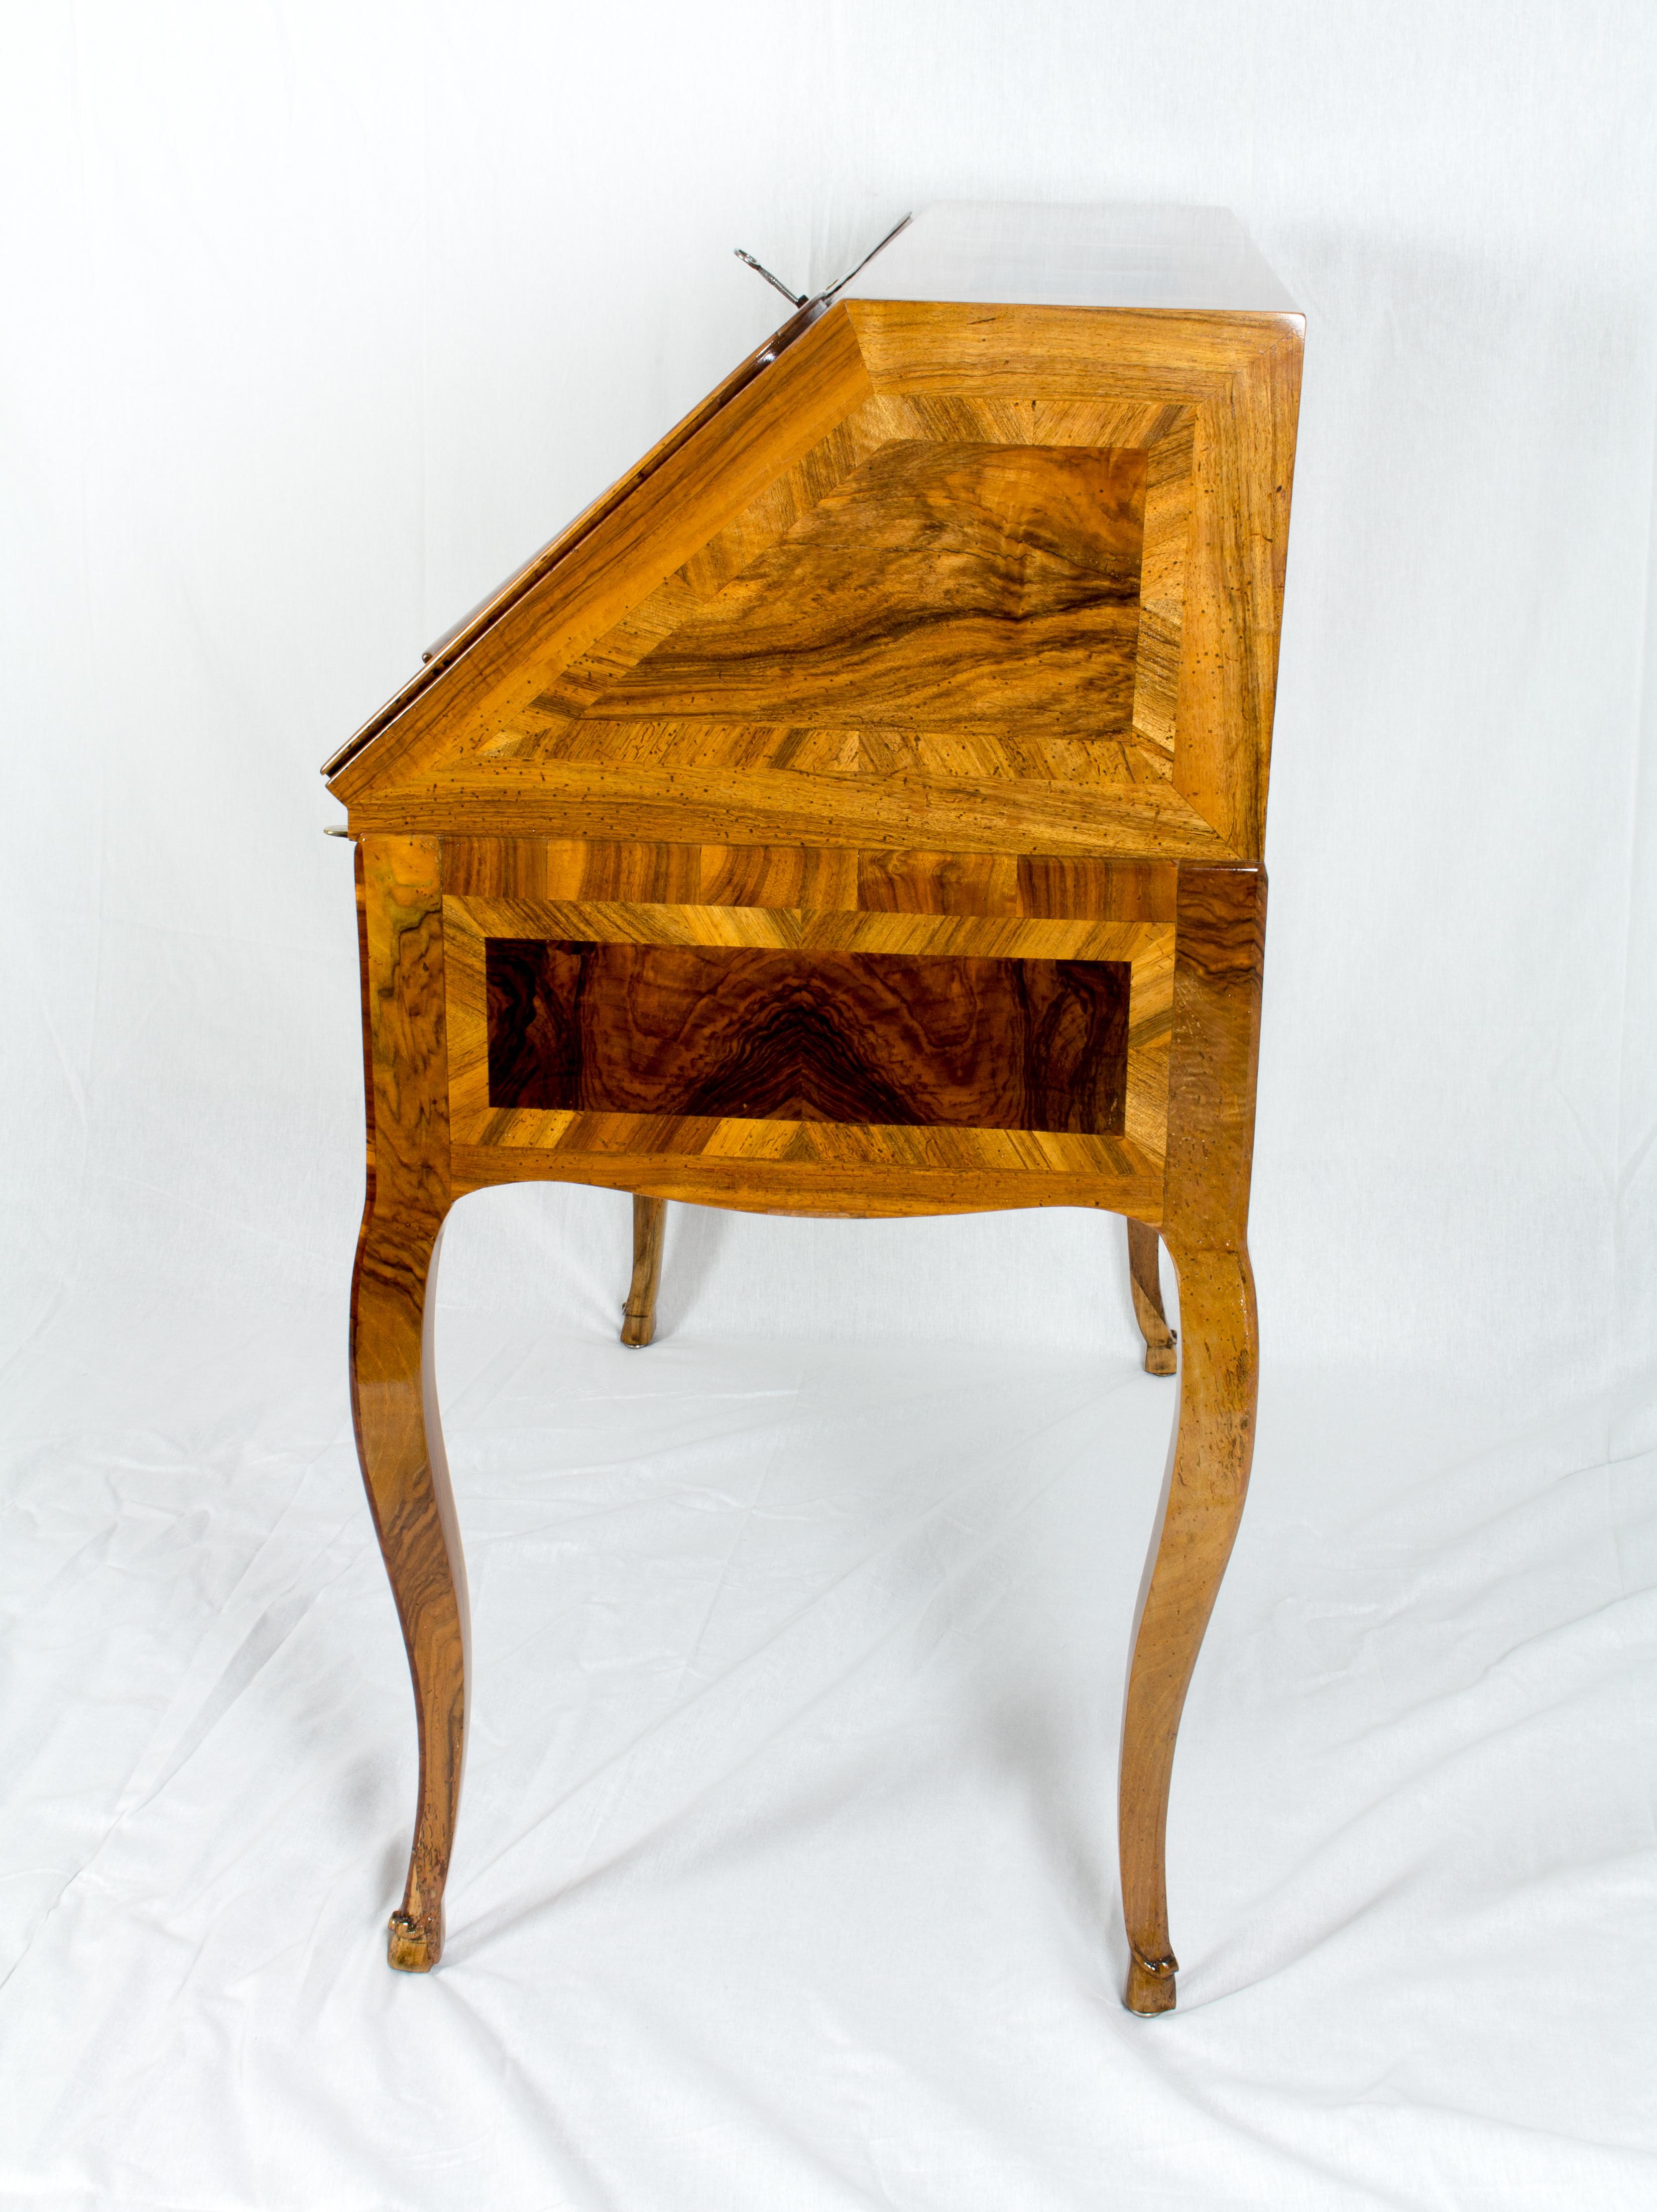 The desk is from the time around 1730 and covered with a beautiful marquetry of different walnut / walnut root wood on a pine body.
All three locks are original from that time as well as the fittings. 
The Secretaire is in very good restored